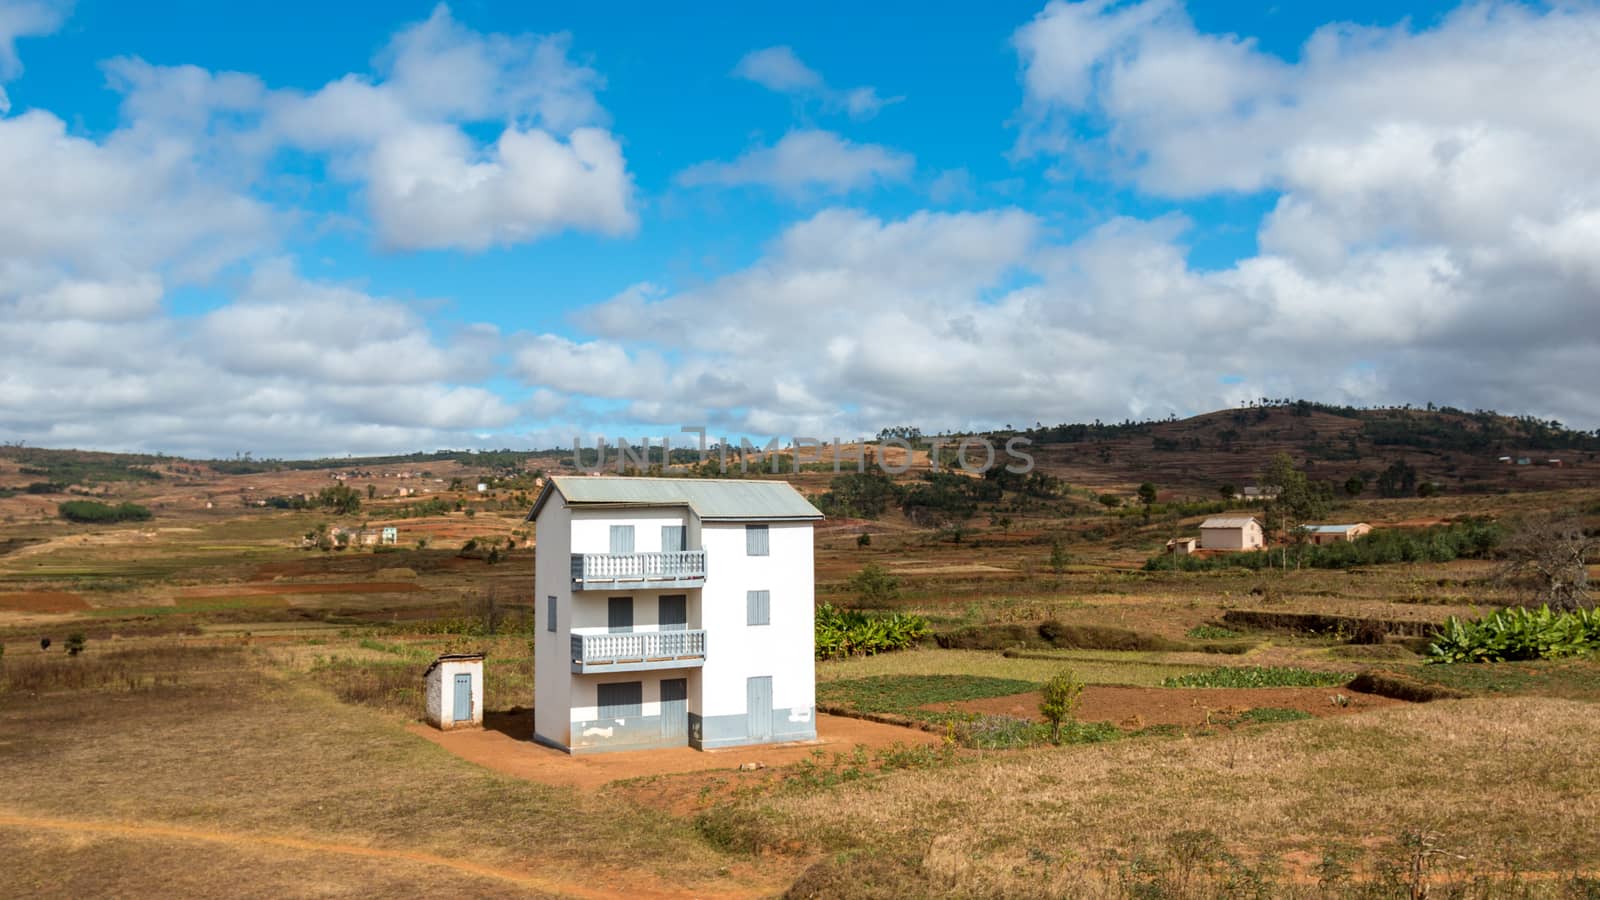 A two story white house next to a small white house in the middle of a beautiful landscape in Madagascar